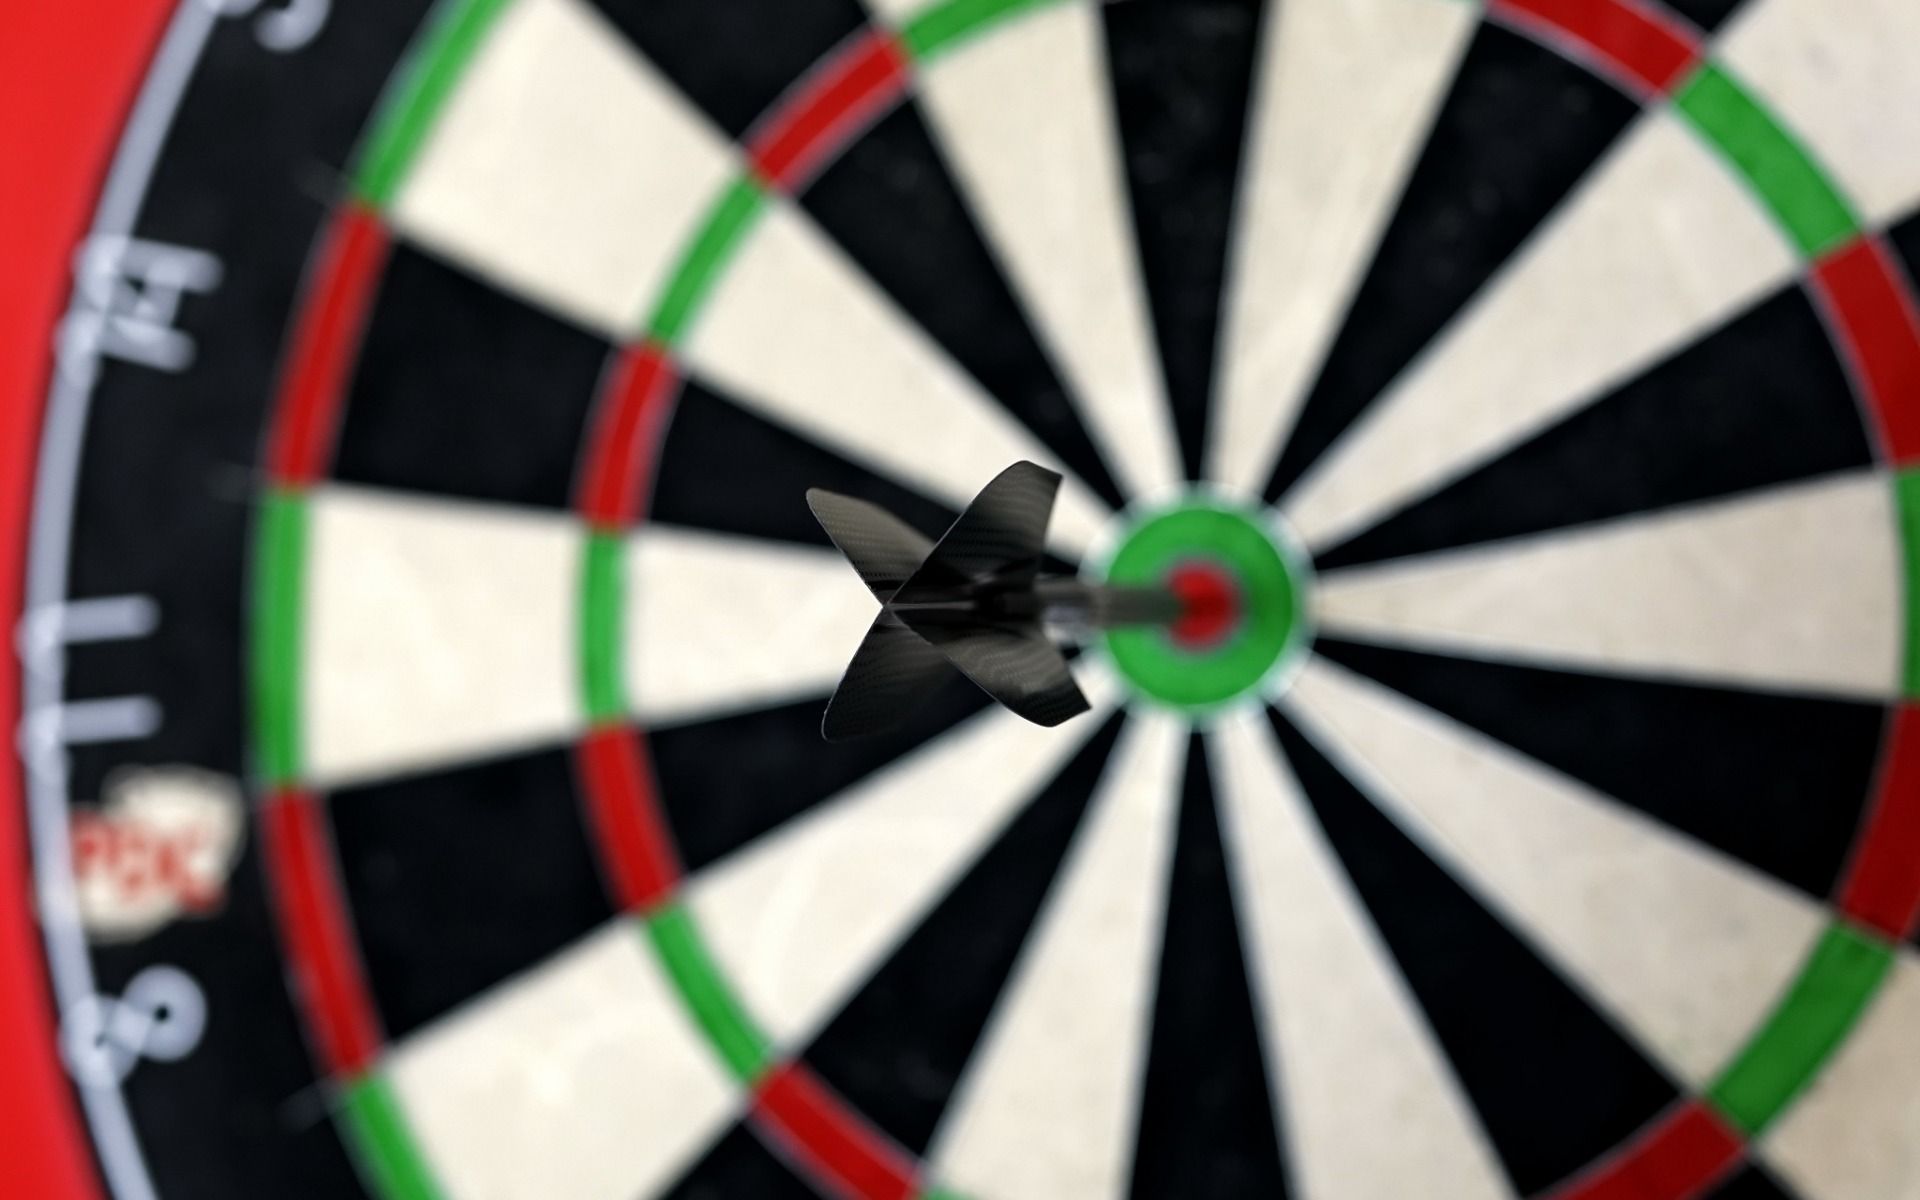 Download wallpaper darts, hit in target, games, goal concepts, target for desktop with resolution 1920x1200. High Quality HD picture wallpaper